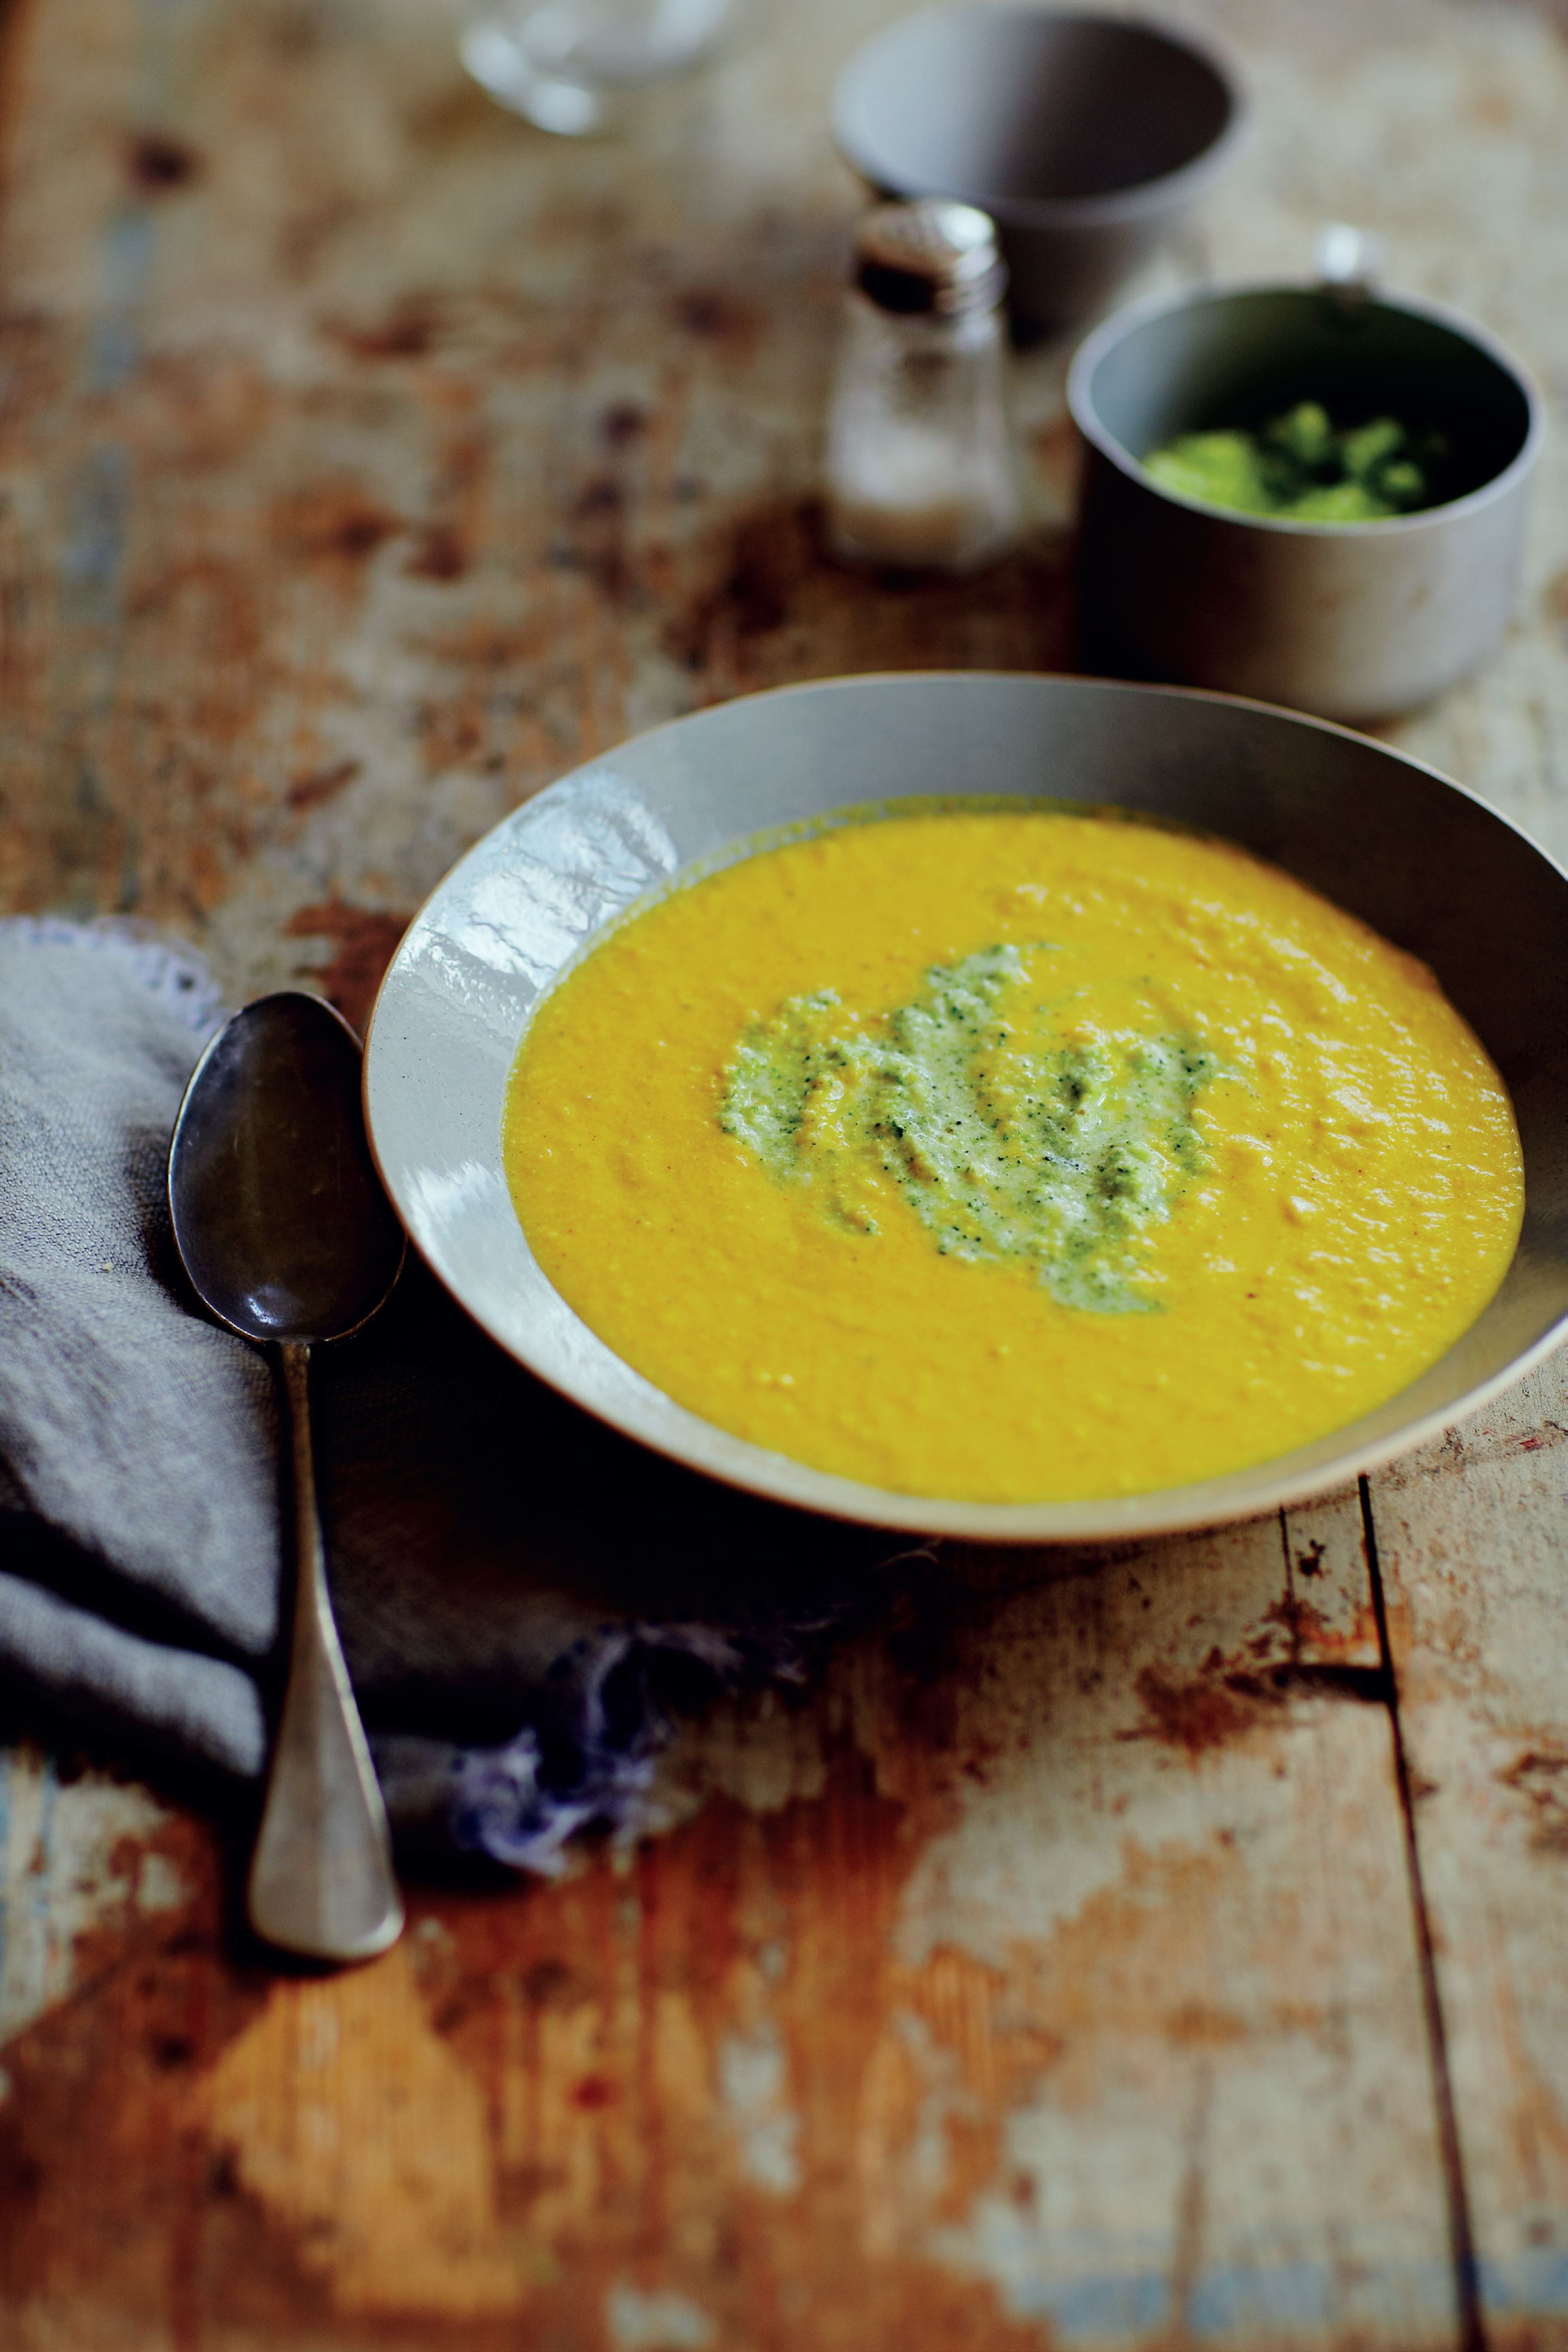 Cashew and corn soup with broccoli almond purée